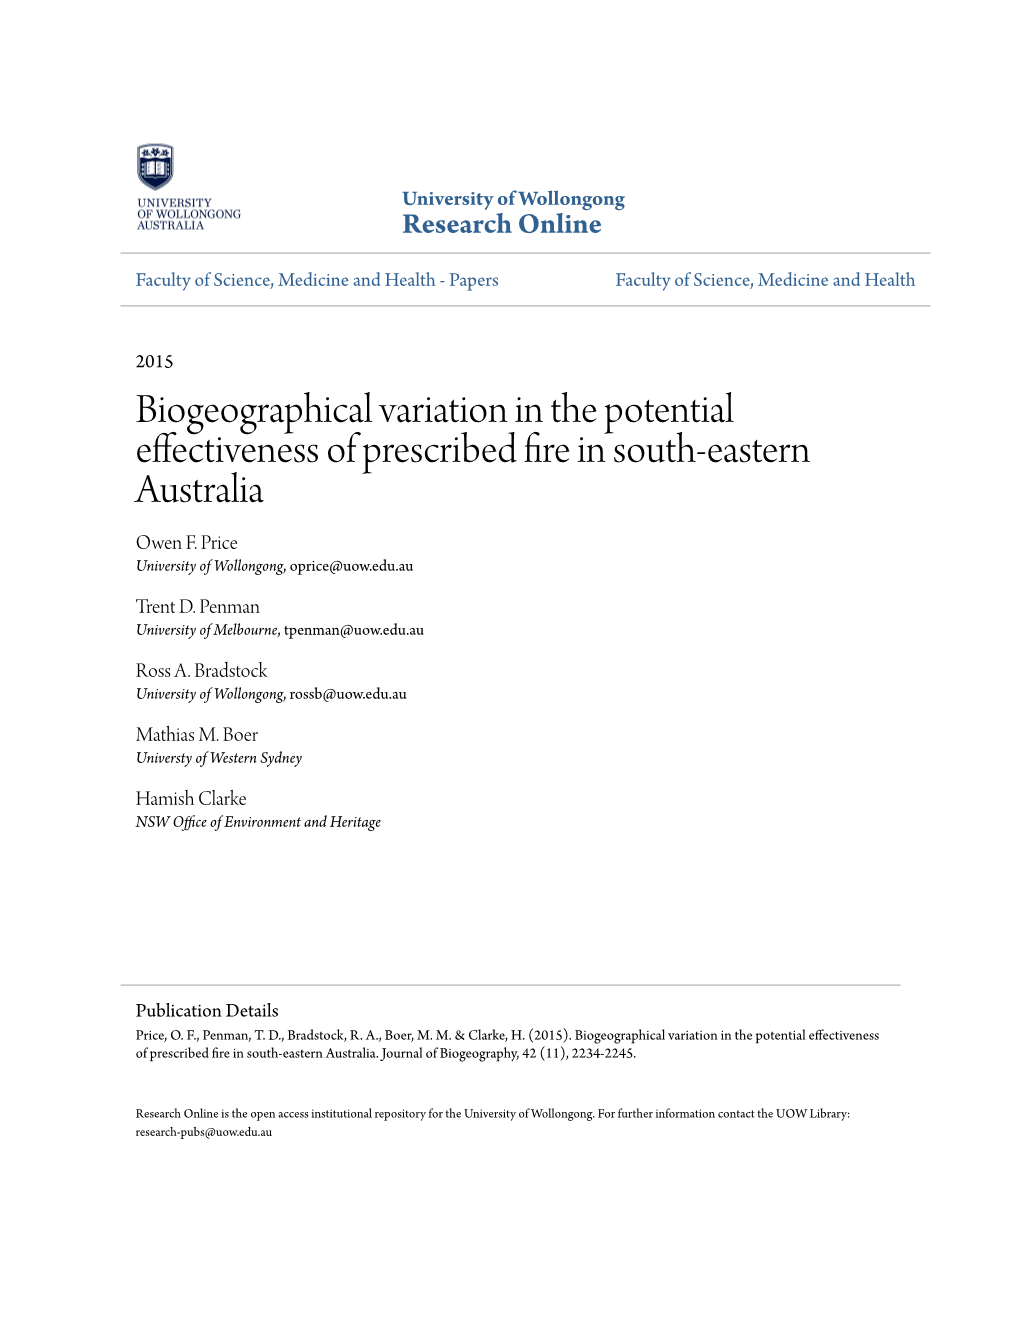 Biogeographical Variation in the Potential Effectiveness of Prescribed Fire in South-Eastern Australia Owen F